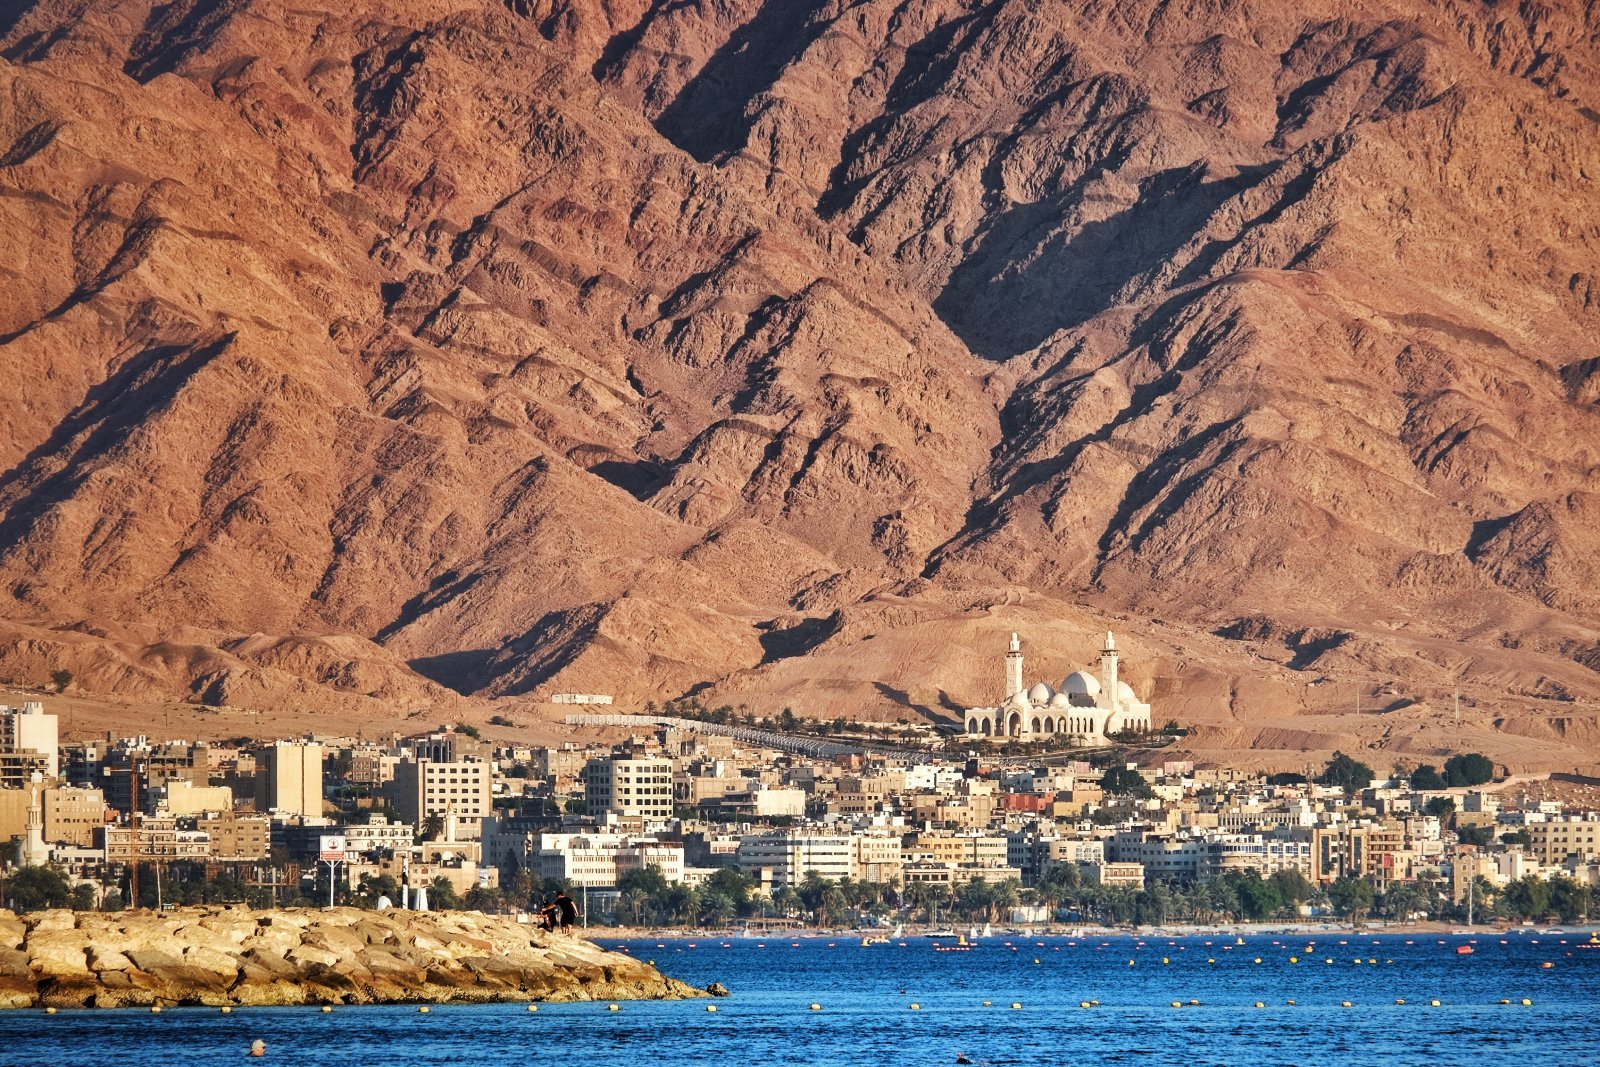 <p><span>Conclude your day with a drive to Aqaba, Jordan’s only coastal city, about two hours from Petra. Enjoy sunset drinks at one of the beachfront resorts and dinner at a local seafood restaurant, where you can savor the fresh catch of the day while overlooking the Red Sea.</span></p> <p><strong>Insider’s Tip: </strong><span>Choose a restaurant on the Corniche for the best sea views and a lively atmosphere.</span></p> <p><strong>How to Get There: </strong><span>Regular buses and taxis connect Petra to Aqaba, making it an easy journey after a day of exploration.</span></p>